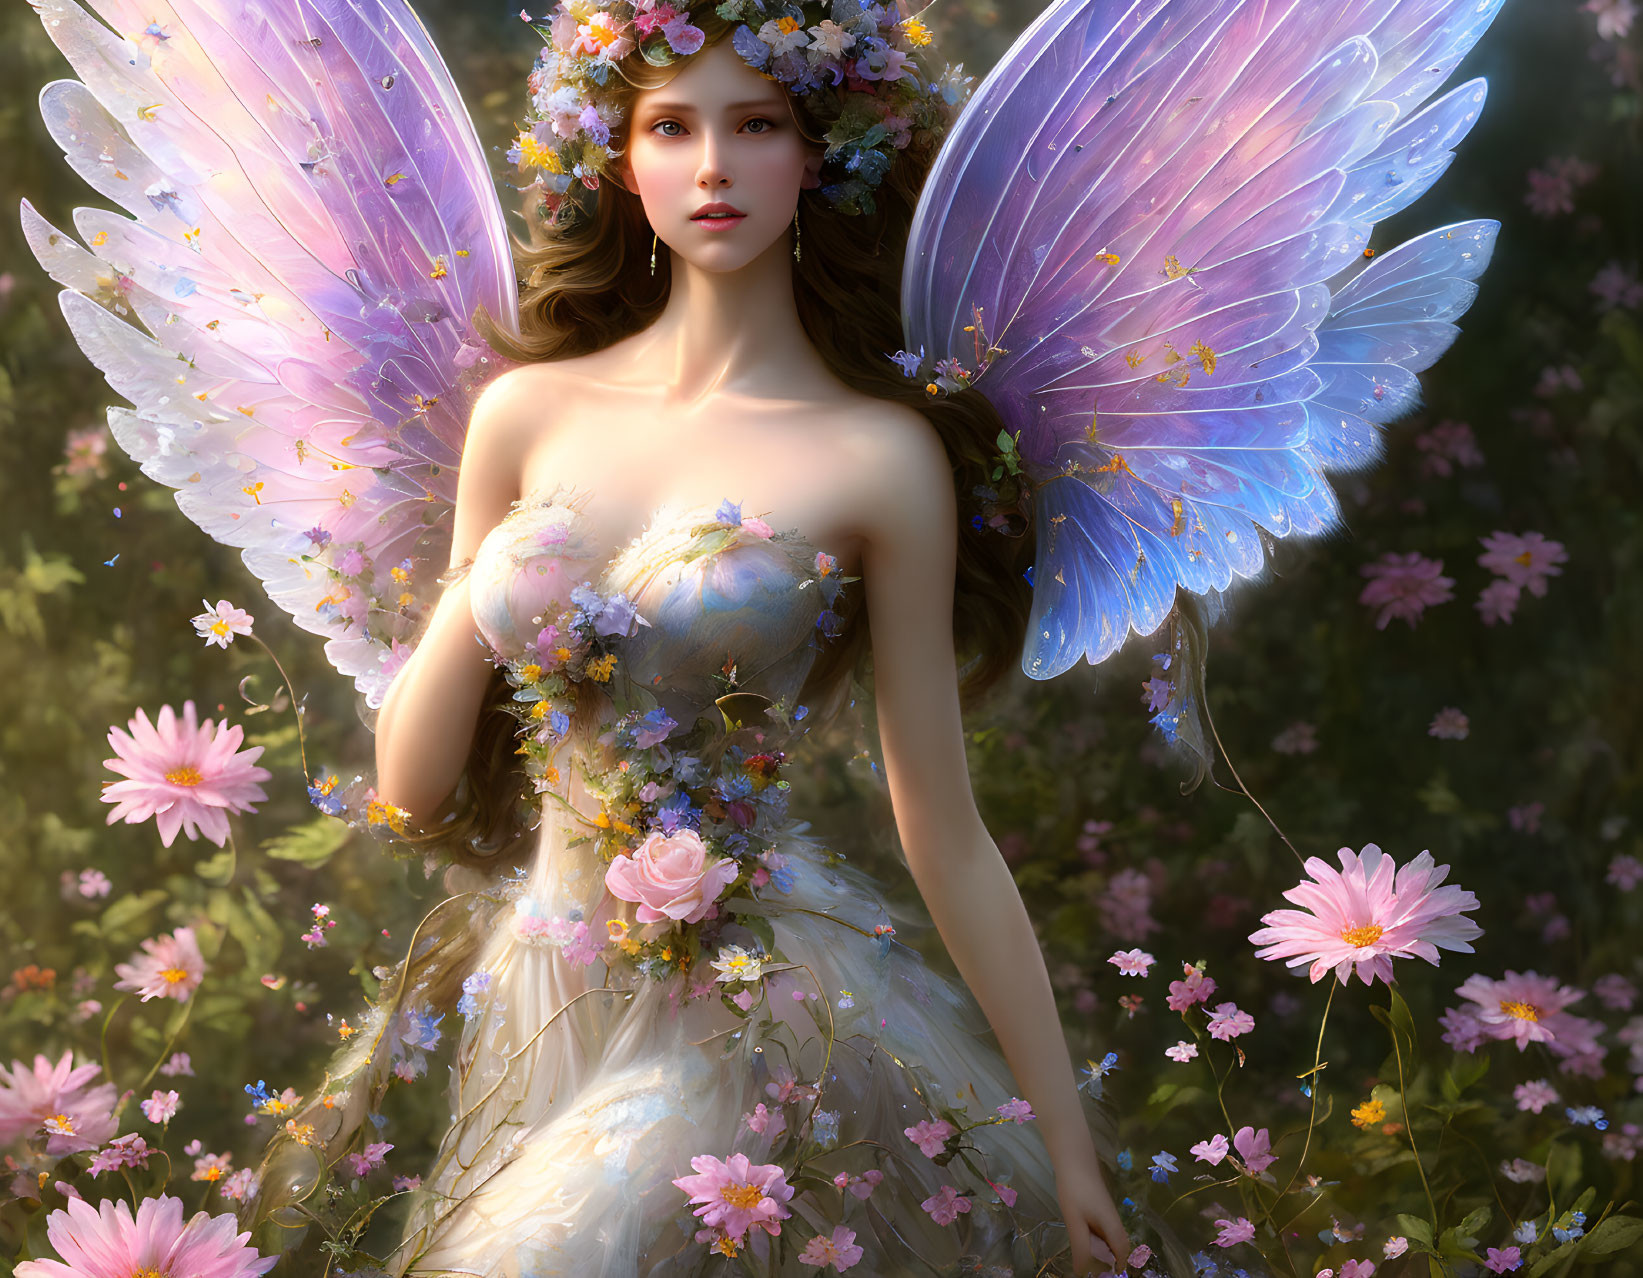 Fantastical image of a fairy with iridescent wings in a sunlit glade